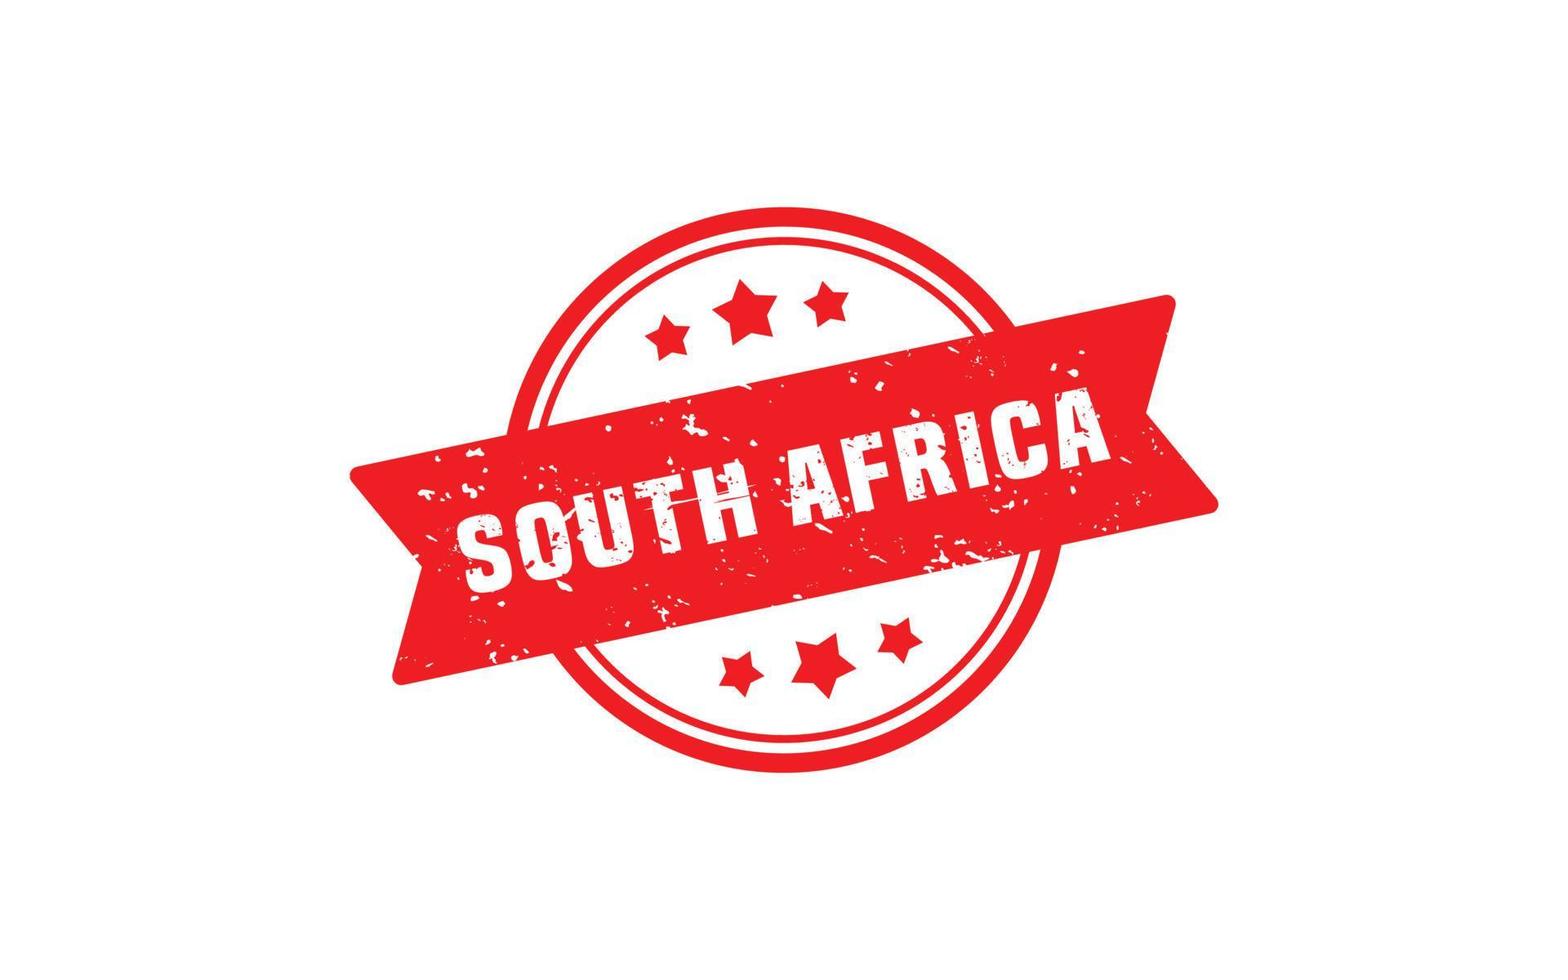 SOUTH AFRICA stamp rubber with grunge style on white background vector